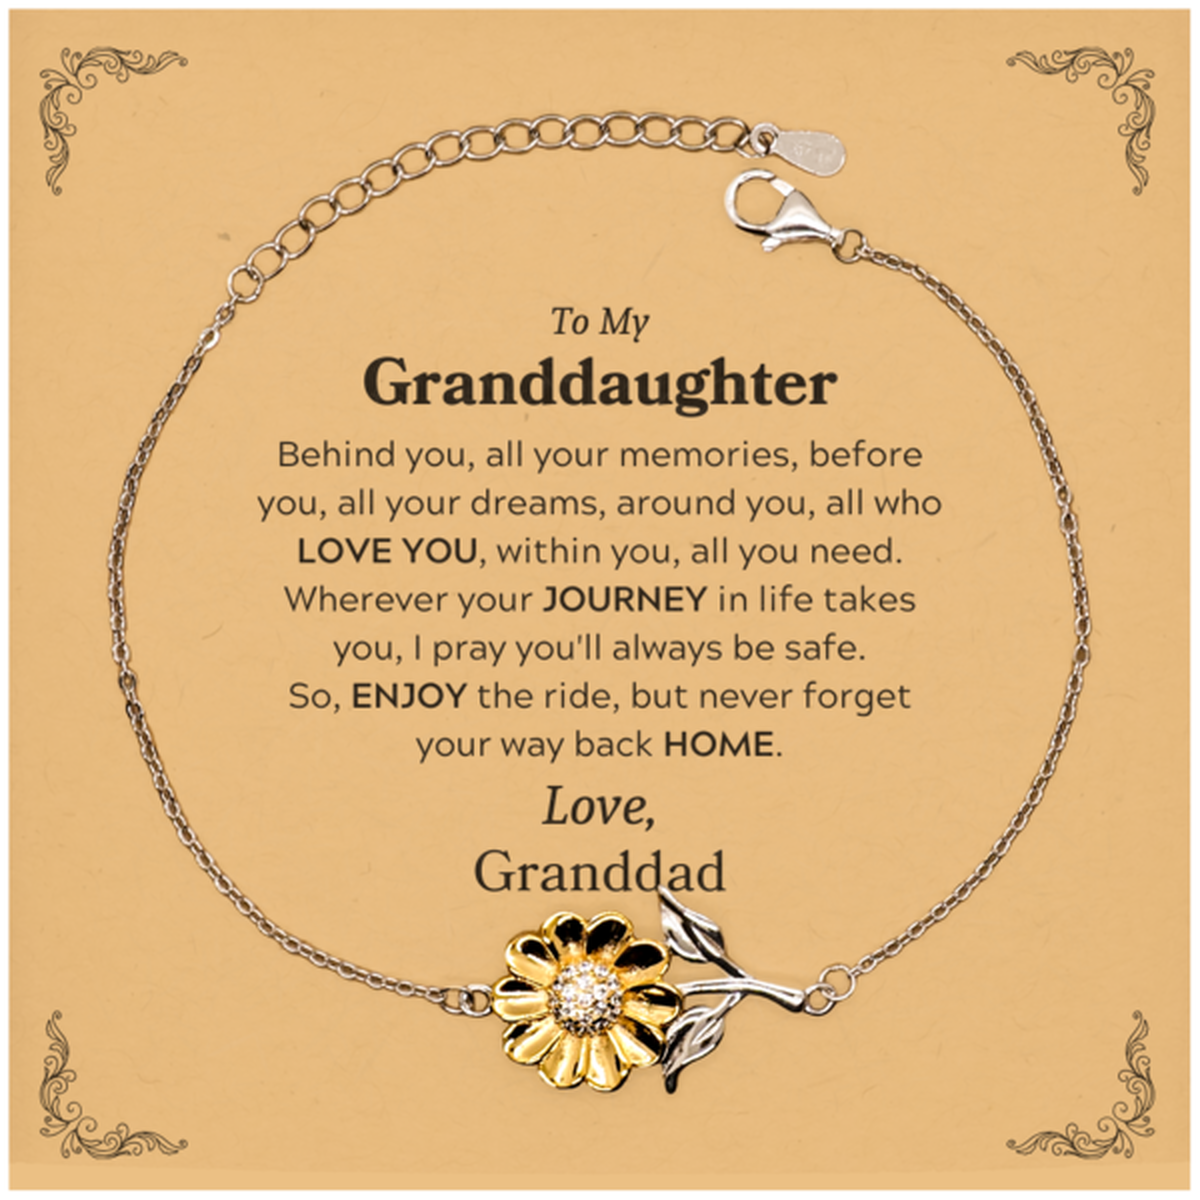 To My Granddaughter Graduation Gifts from Granddad, Granddaughter Sunflower Bracelet Christmas Birthday Gifts for Granddaughter Behind you, all your memories, before you, all your dreams. Love, Granddad